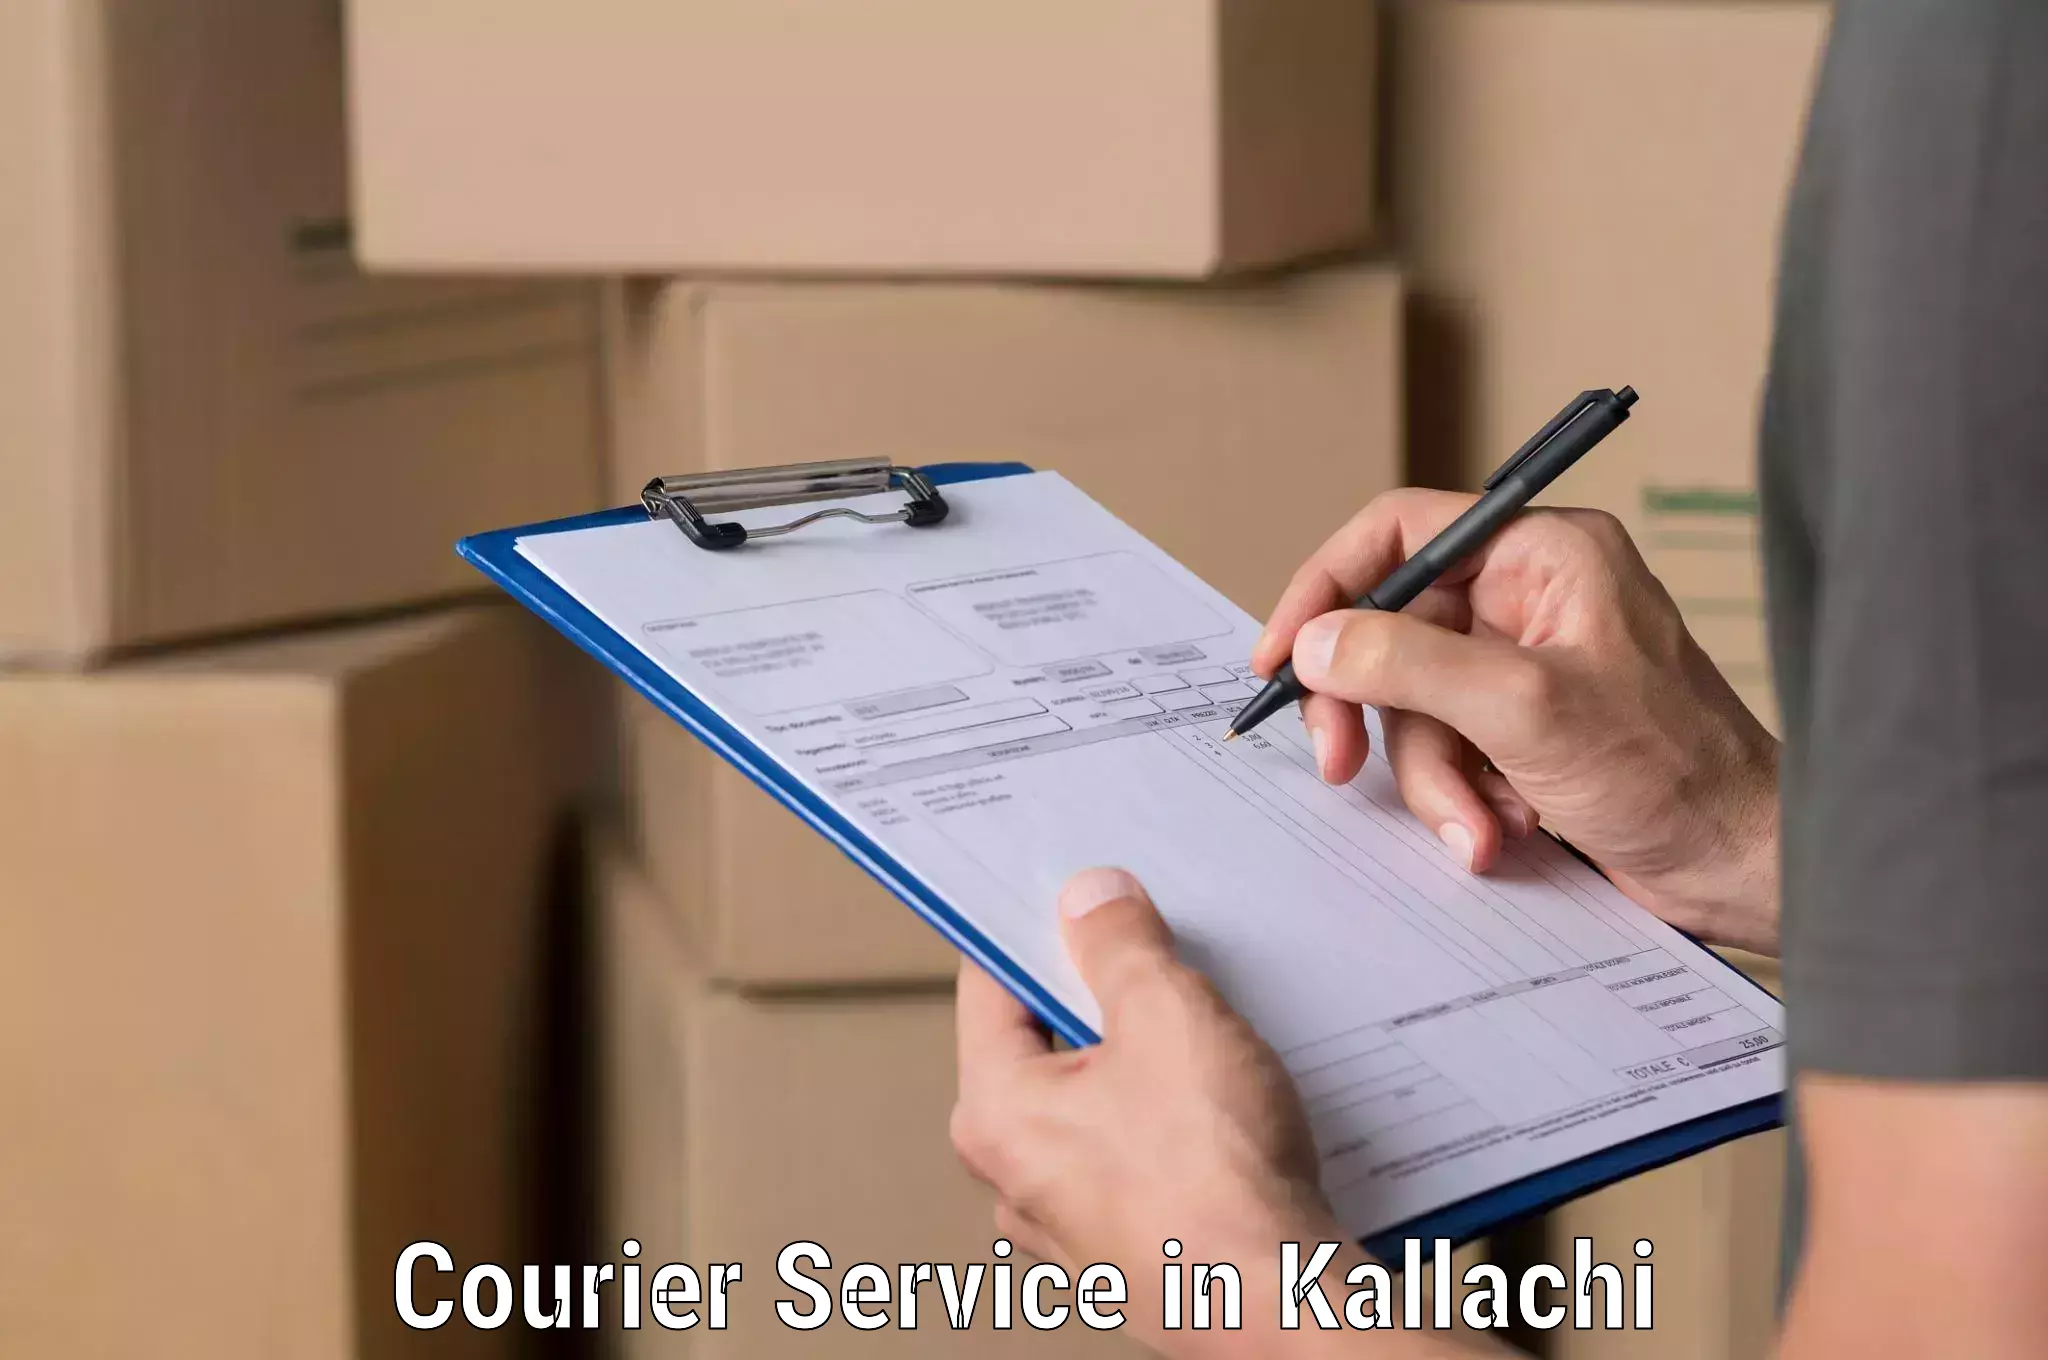 Next-day freight services in Kallachi